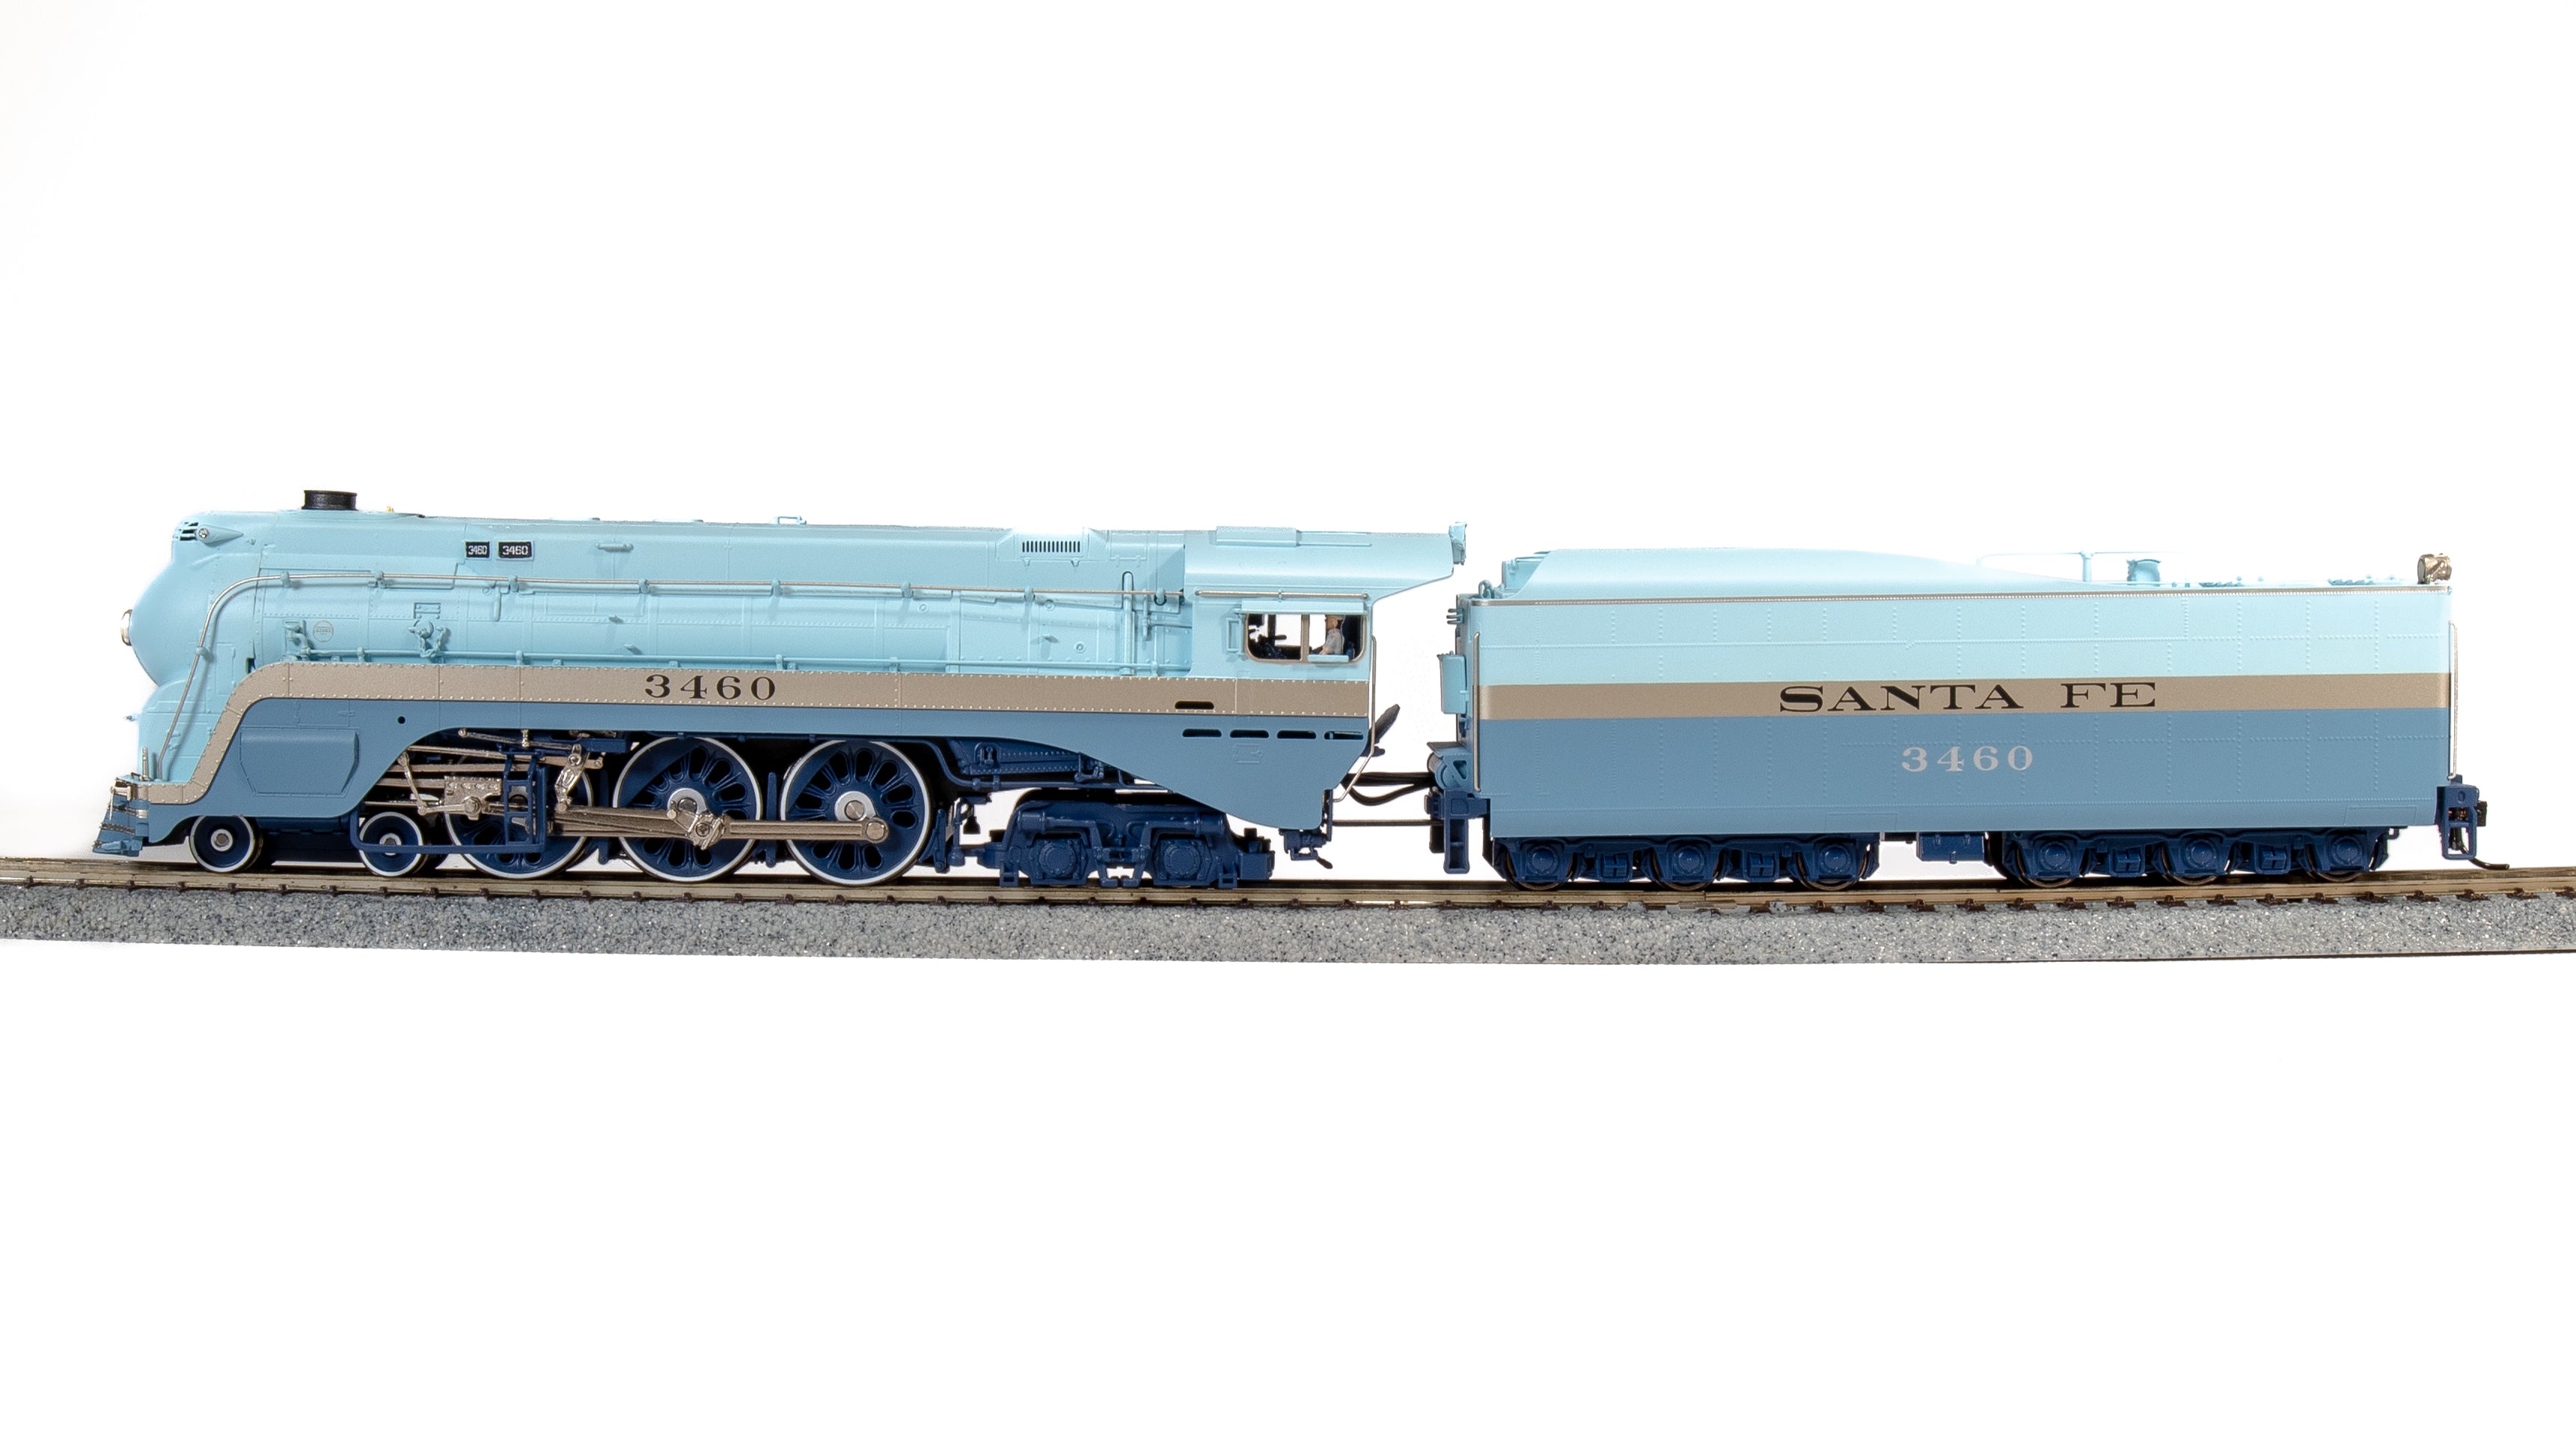 7350 ATSF Blue Goose, #3460, As-Delivered w/ 3460 on side of tender, Paragon4 Sound/DC/DCC, Smoke, HO Default Title